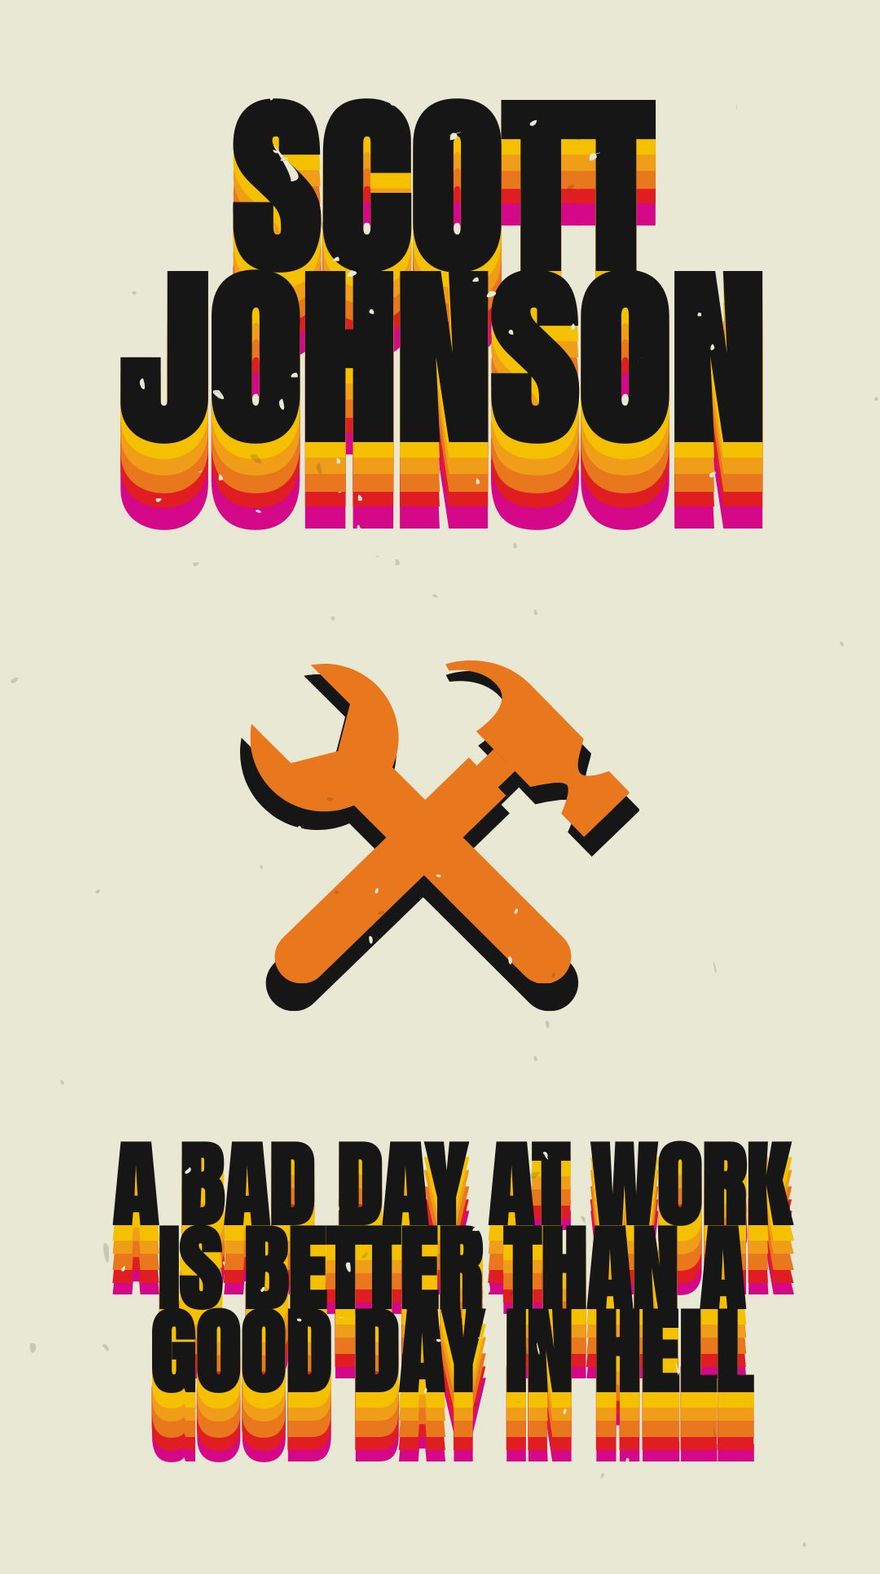 Free Scott Johnson - A bad day at work is better than a good day in hell.